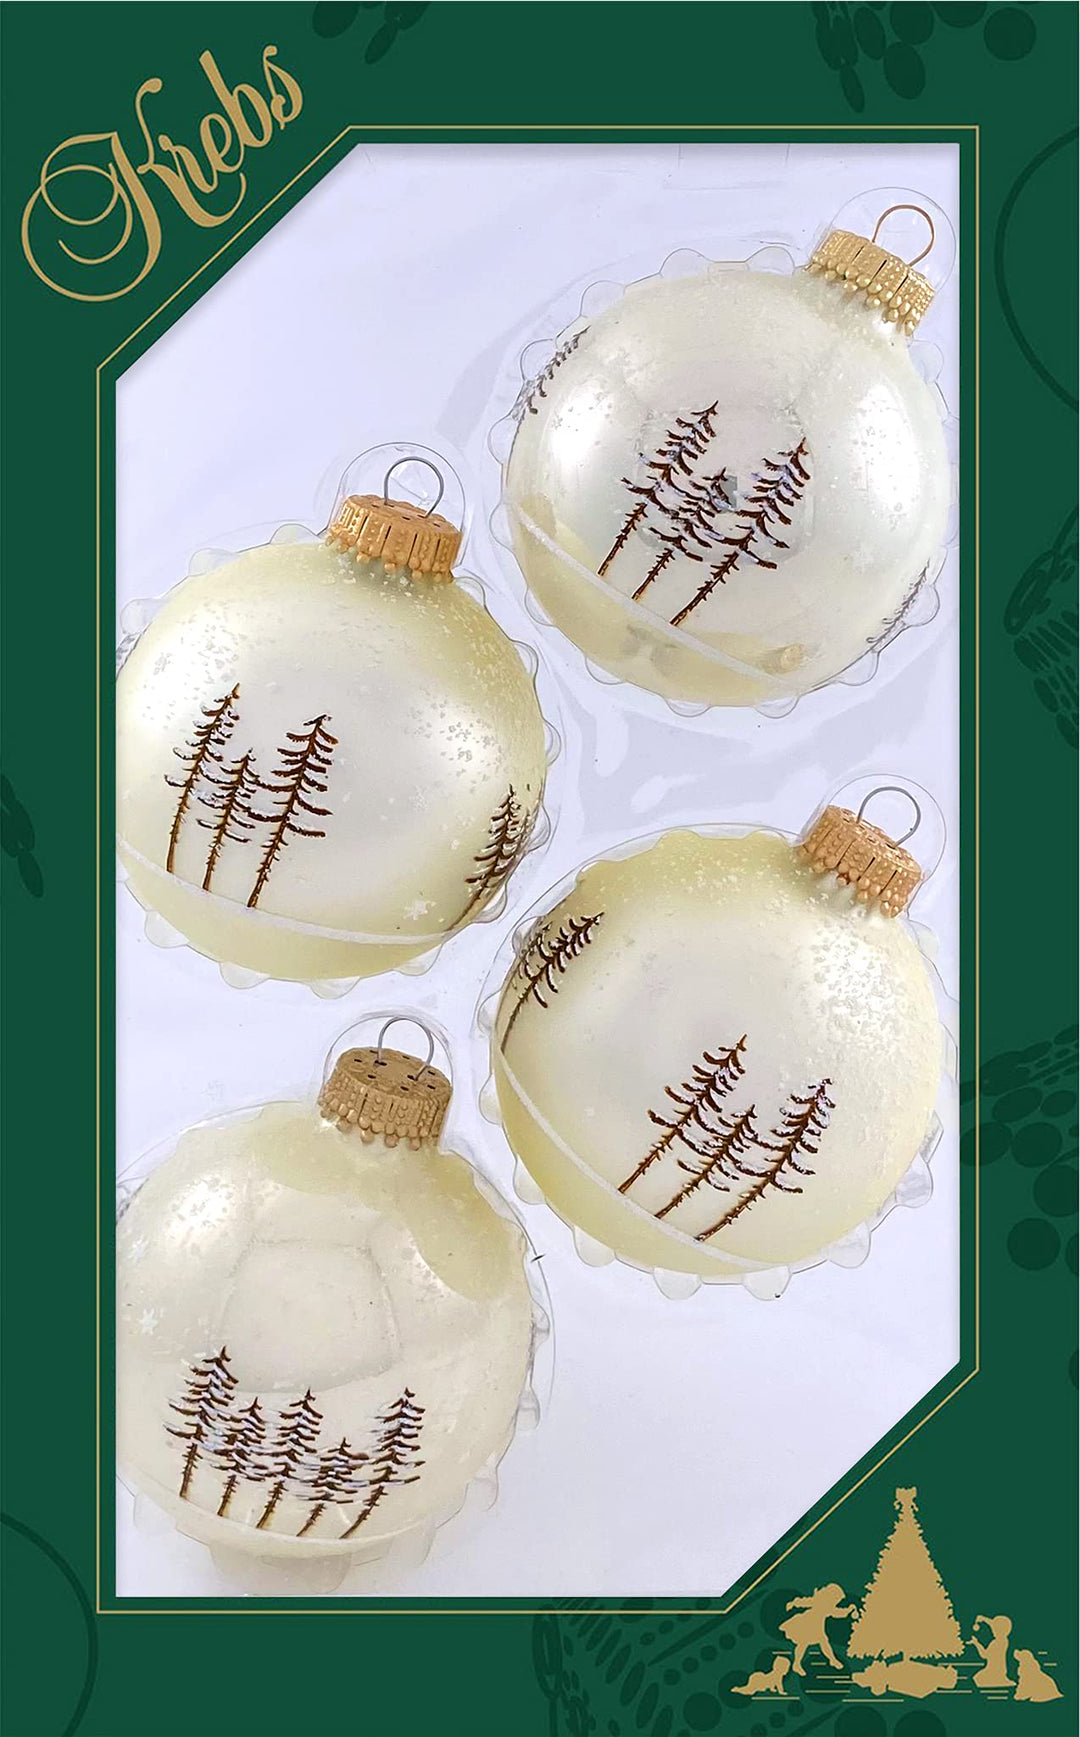 Glass Christmas Tree Ornaments - 67mm/2.63" [4 Pieces] Decorated Balls from Christmas by Krebs Seamless Hanging Holiday Decor (Vanilla Velvet and Pearl White with Trees)